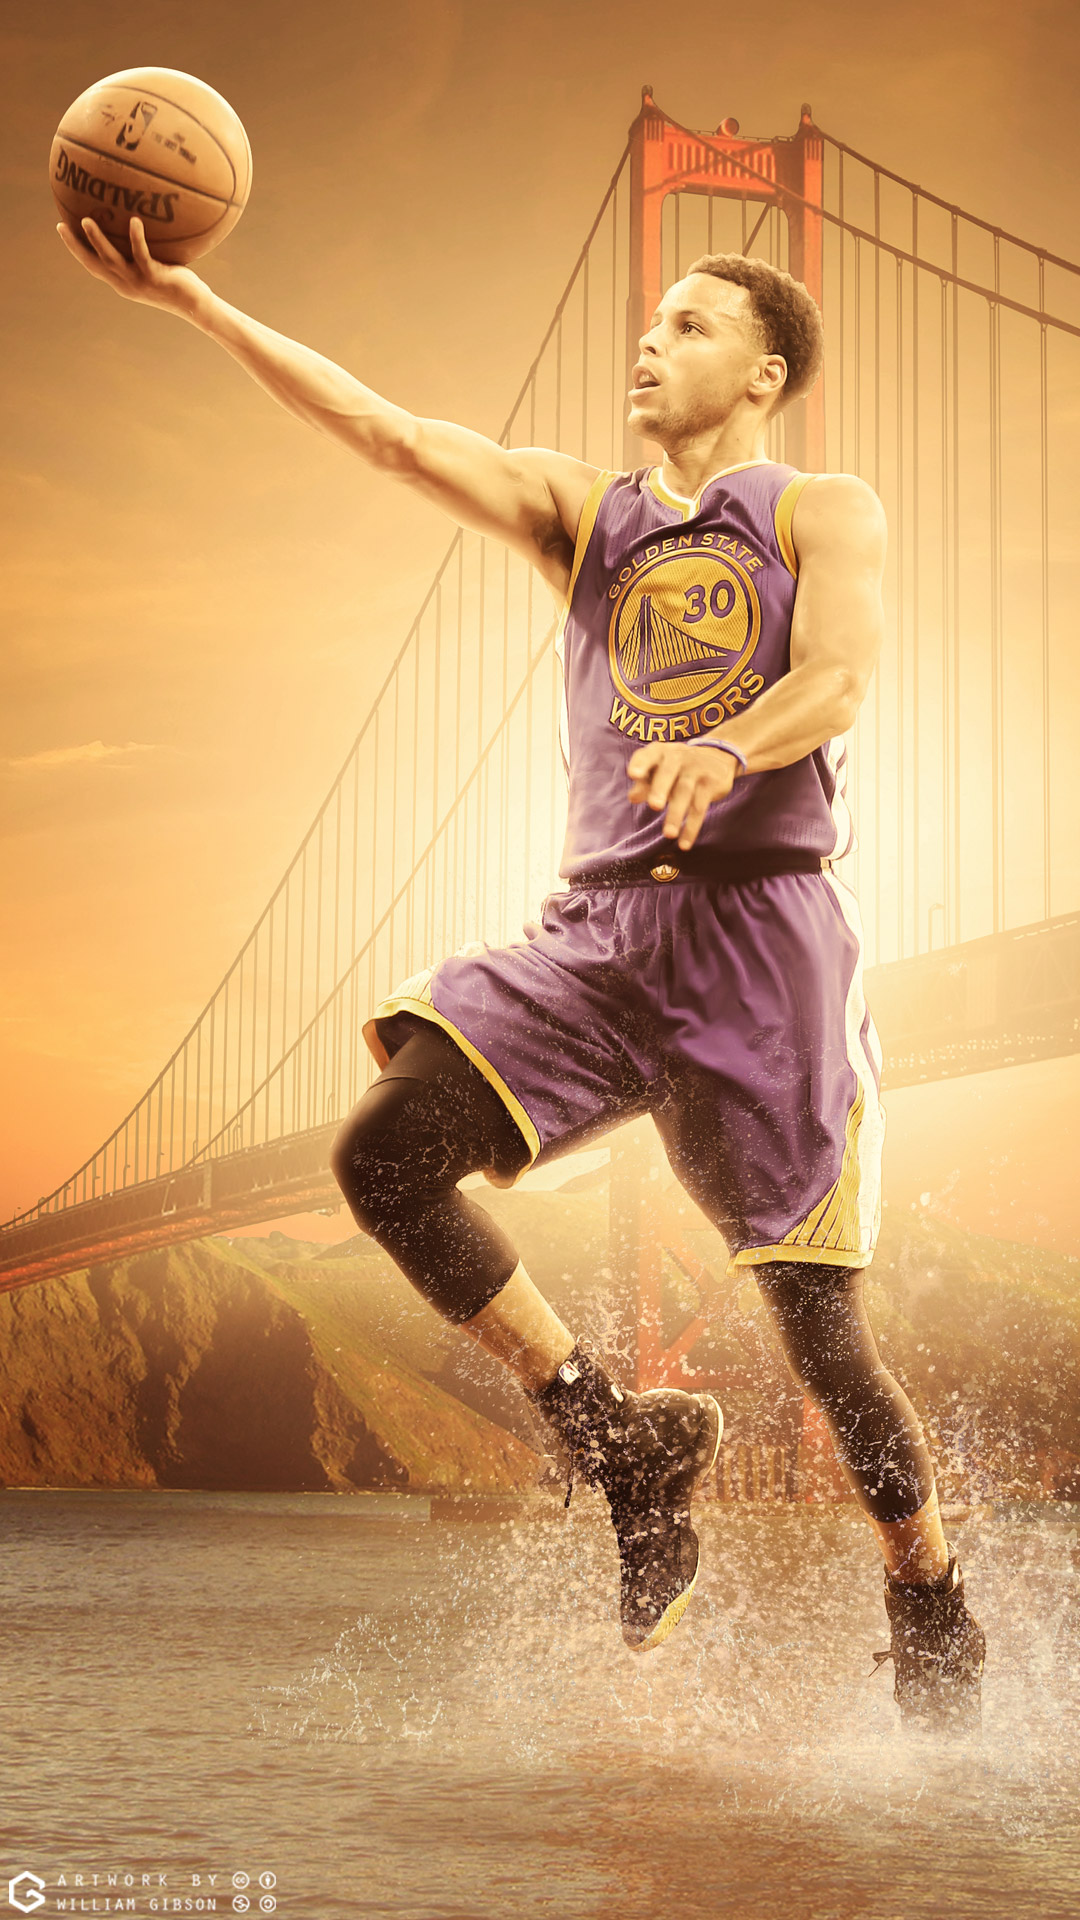 2932x2932 Stephen Curry 2020 Ipad Pro Retina Display HD 4k Wallpapers  Images Backgrounds Photos and Pictures